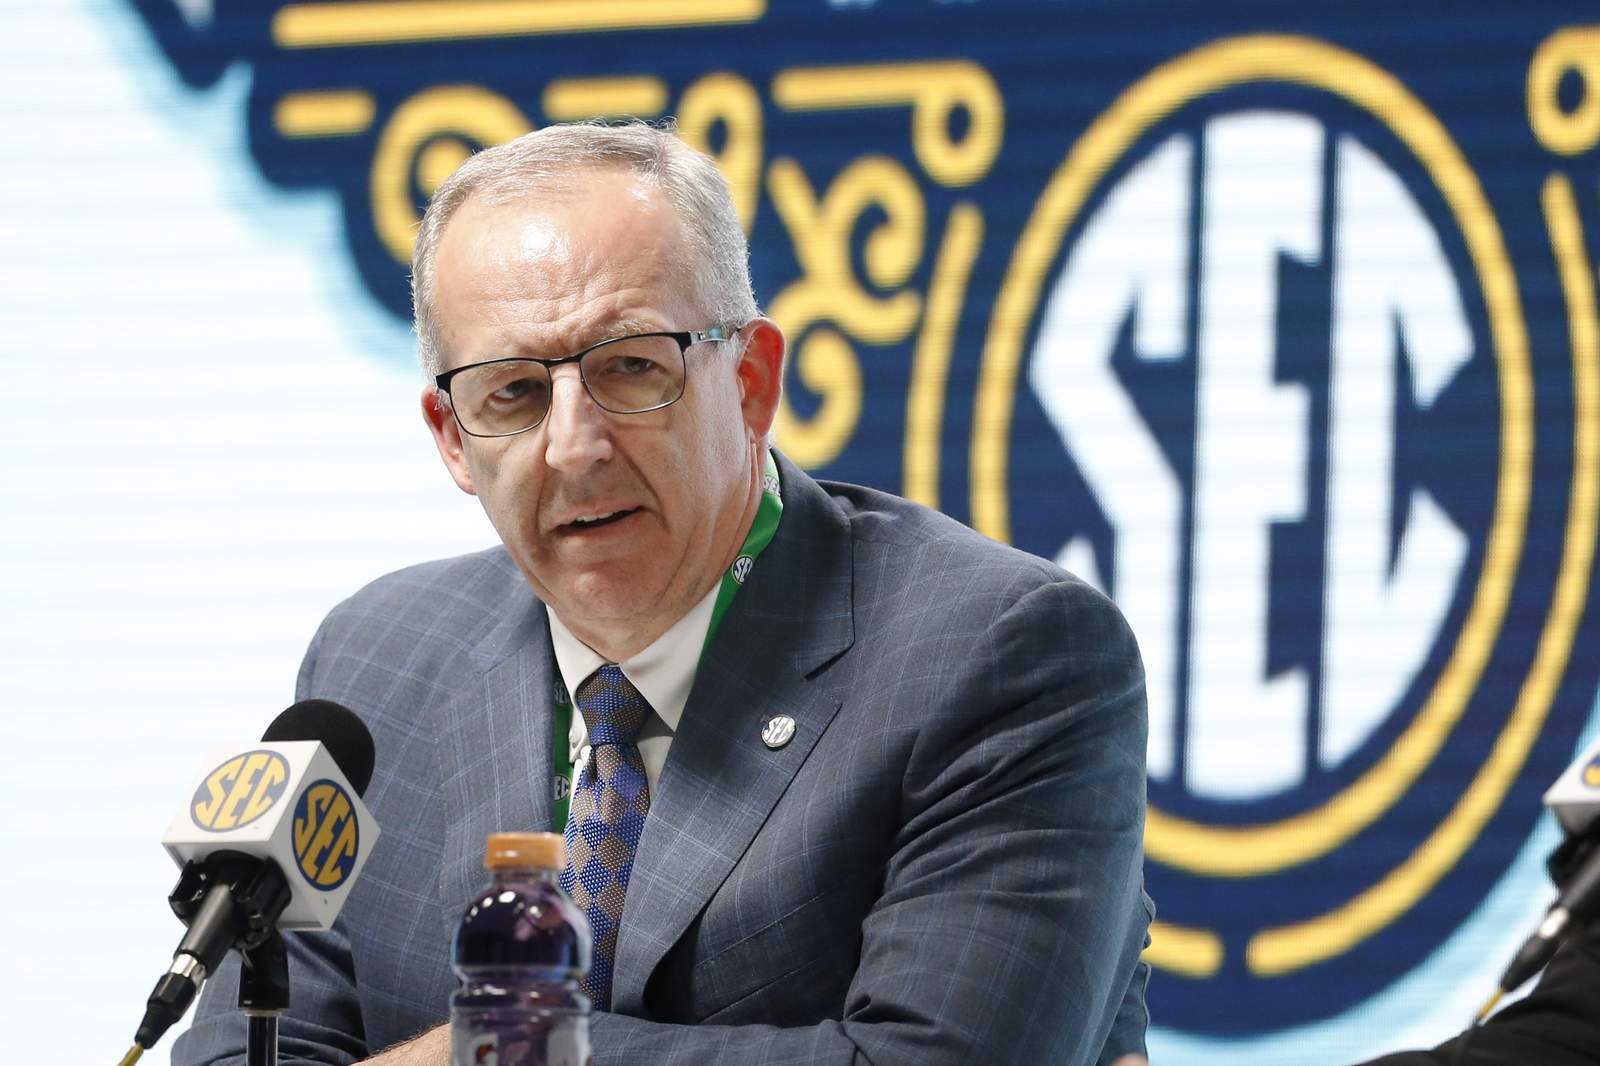 SEC commish remains comfortable with safety, return to field this fall